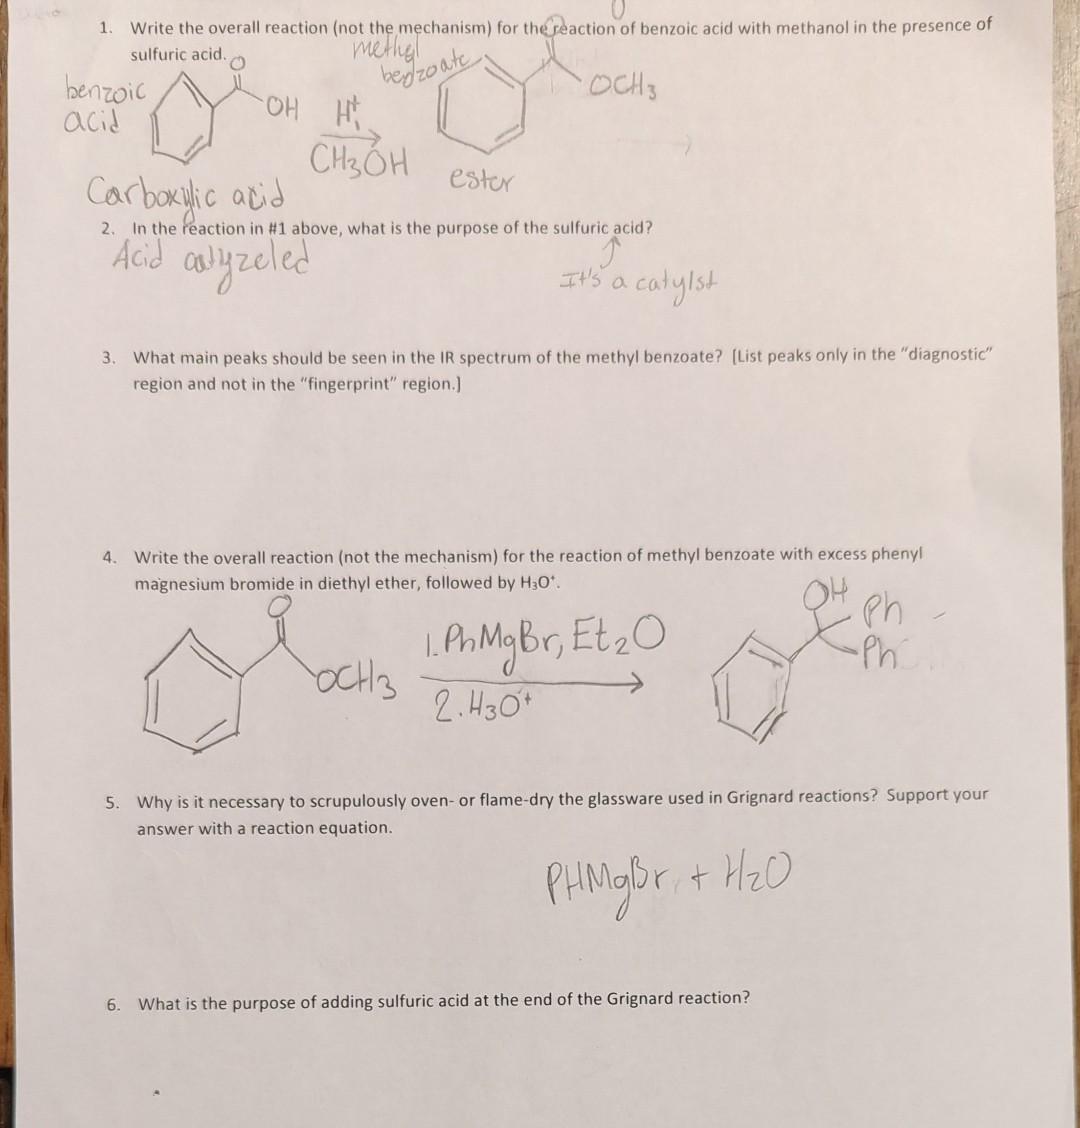 1. Write the overall reaction (not the mechanism) for the reaction of benzoic acid with methanol in the presence of sulfuric 